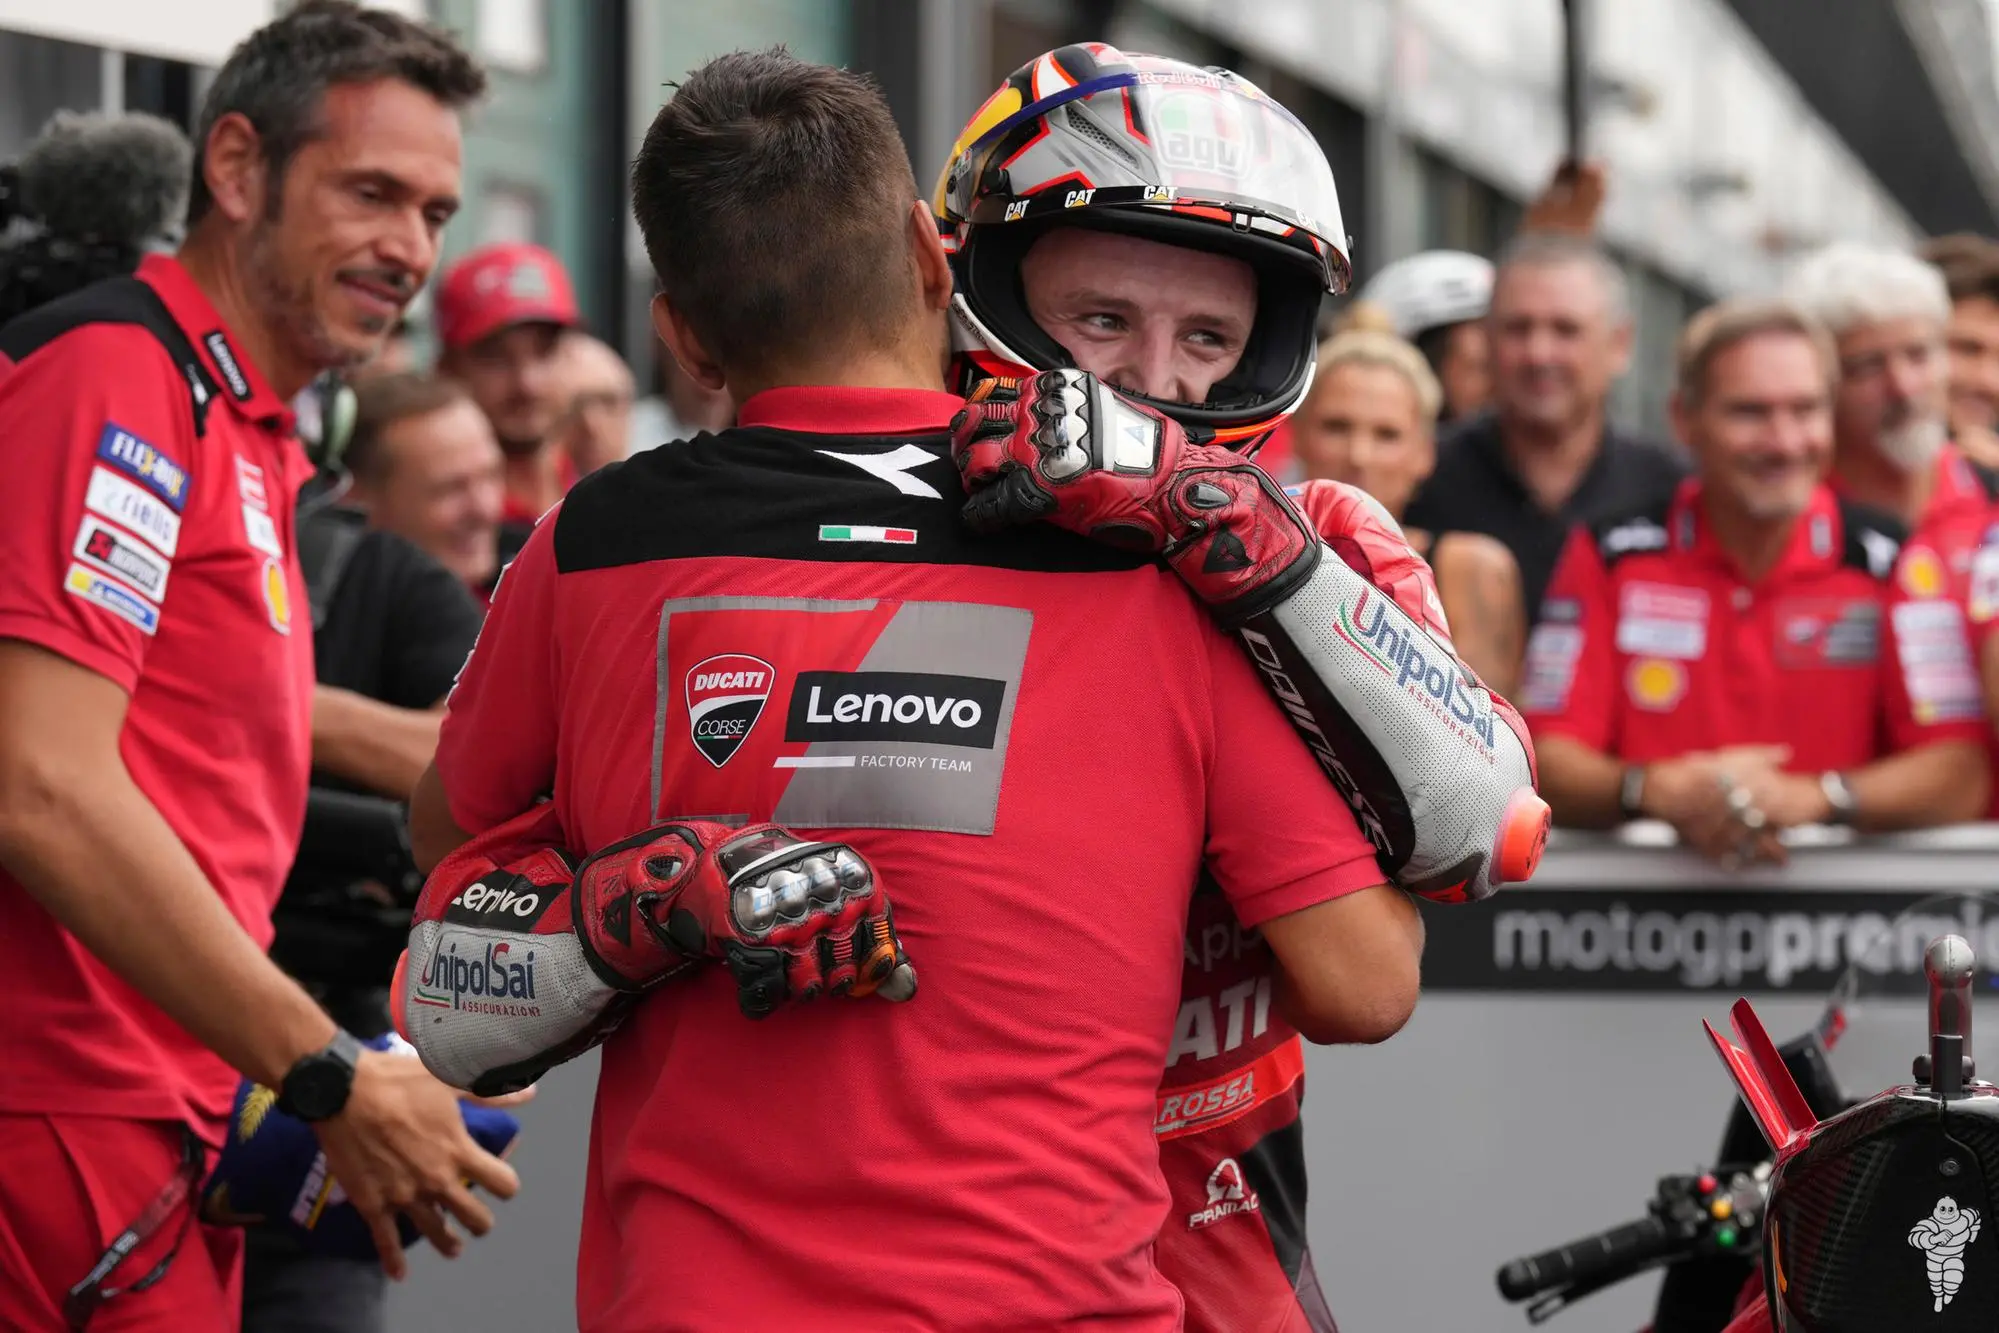 Jack Miller of Australia and Ducati Lenovo Team celebrate the best time scored during qualify of the MotoGP Of San Marino at Marco Simoncelli Circuit on September 3 2022 in Misano Adriatico, Italy. ANSA/DANILO DI GIOVANNI